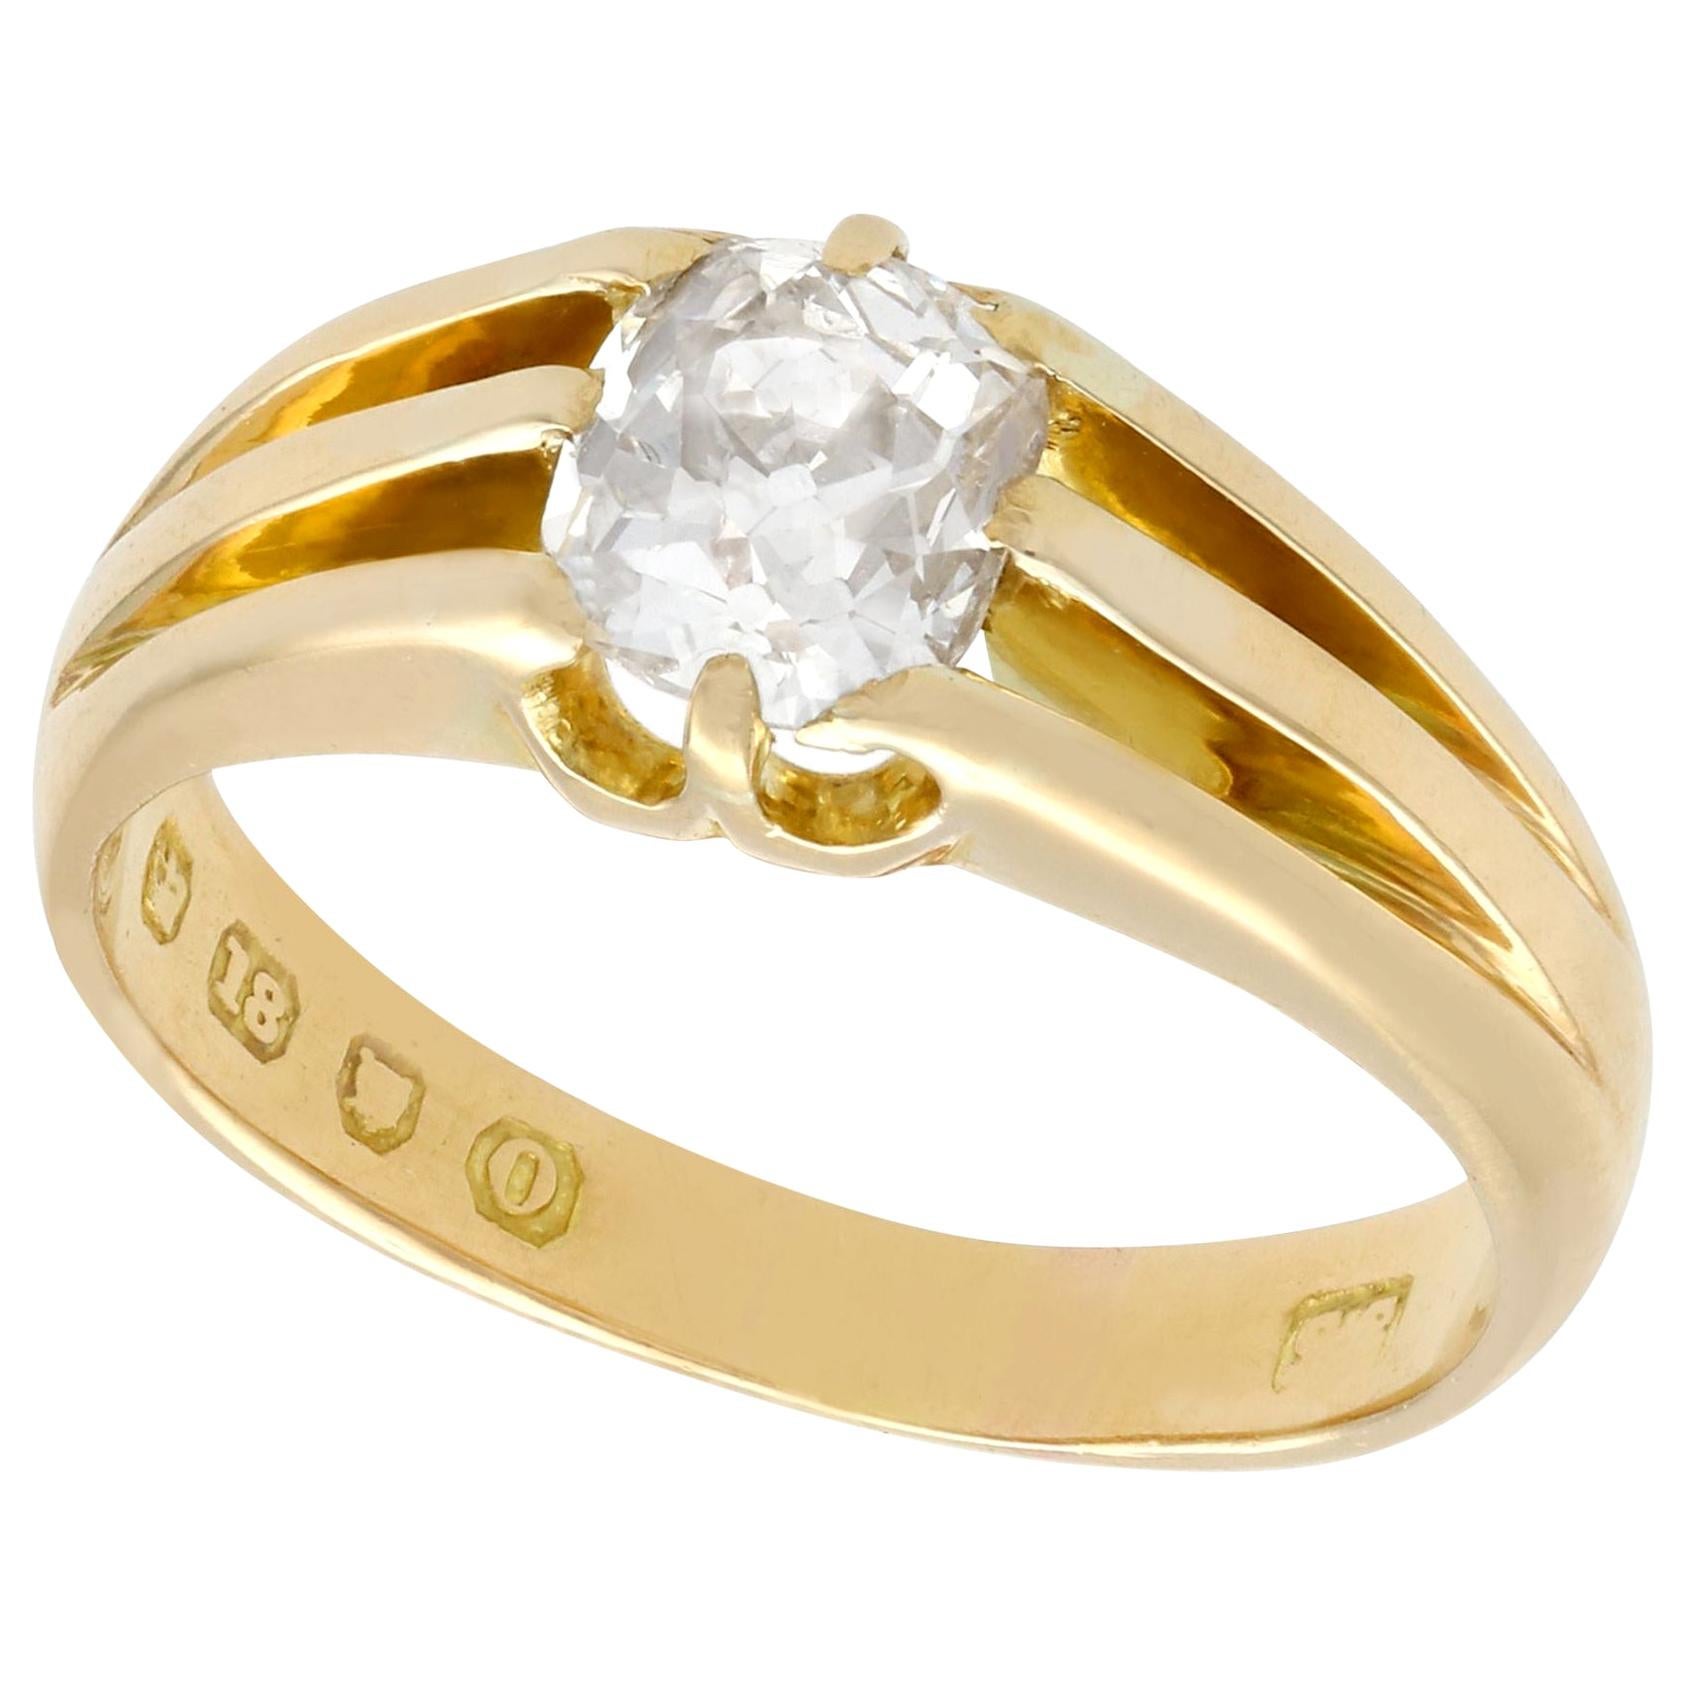 1900s Antique 1.21 Carat Diamond and Yellow Gold Solitaire Engagement Ring